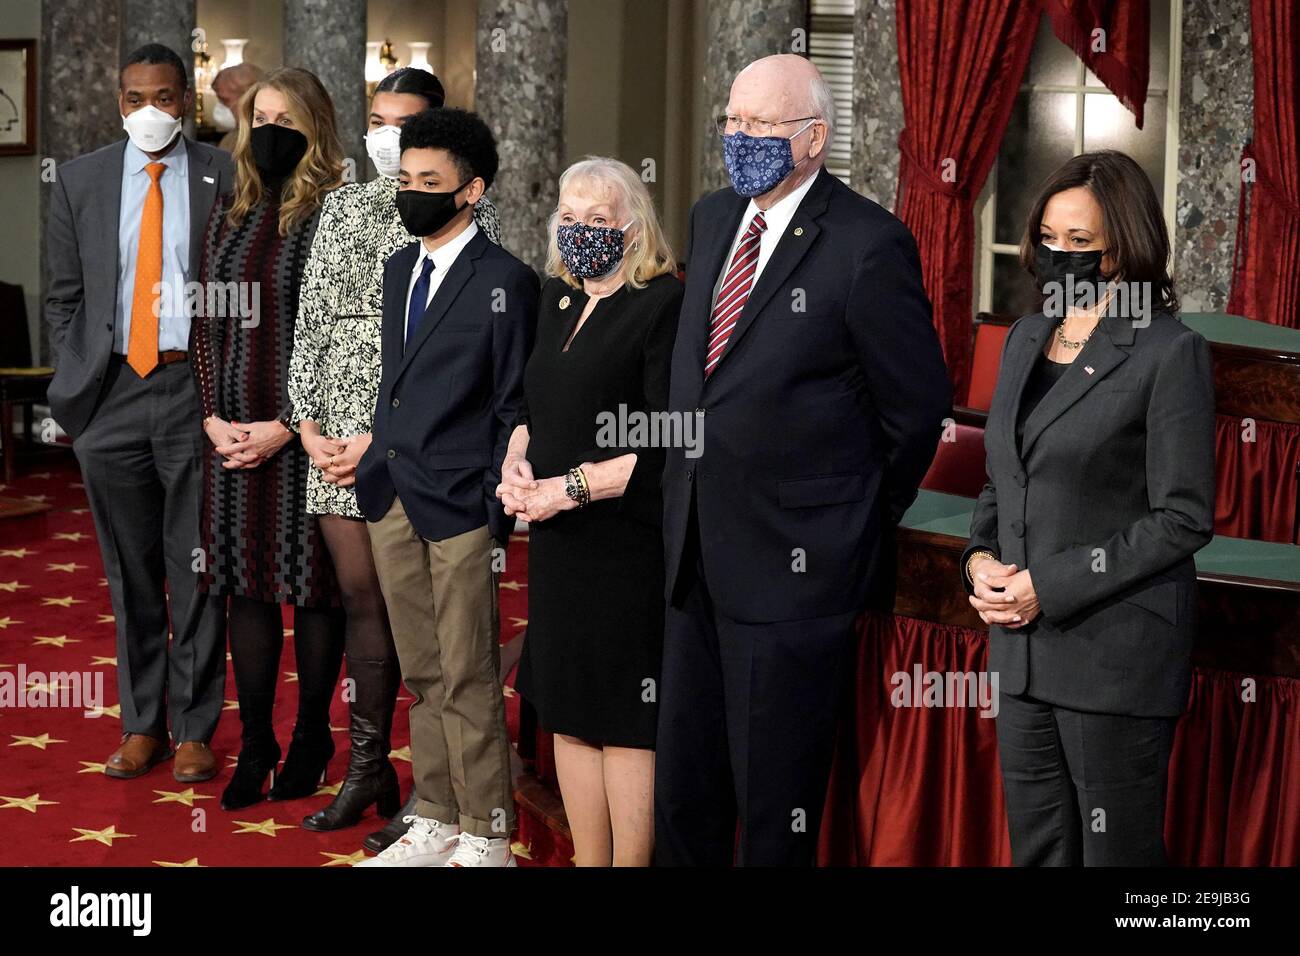 Sen. Patrick Leahy (D-Vt.) and Vice President Kamala Harris, far right, take a photo with LeahyâÂ€Â™s family after a ceremonial swearing in photo op on Thursday, February 4, 2021 in the Old Senate Chamber at the U.S. Capitol in Washington, D.C. From left son-in-law Lawrence Jackson, daughter Alicia Leahy, granddaughter Sophia Jackson, grandson Patrick Jackson, wife Marcelle Pomerleau, Sen. Patrick Leahy (D-Vt.) and Vice President Kamala Harris. Photo by Greg Nash/Pool/ABACAPRESS.COM Stock Photo